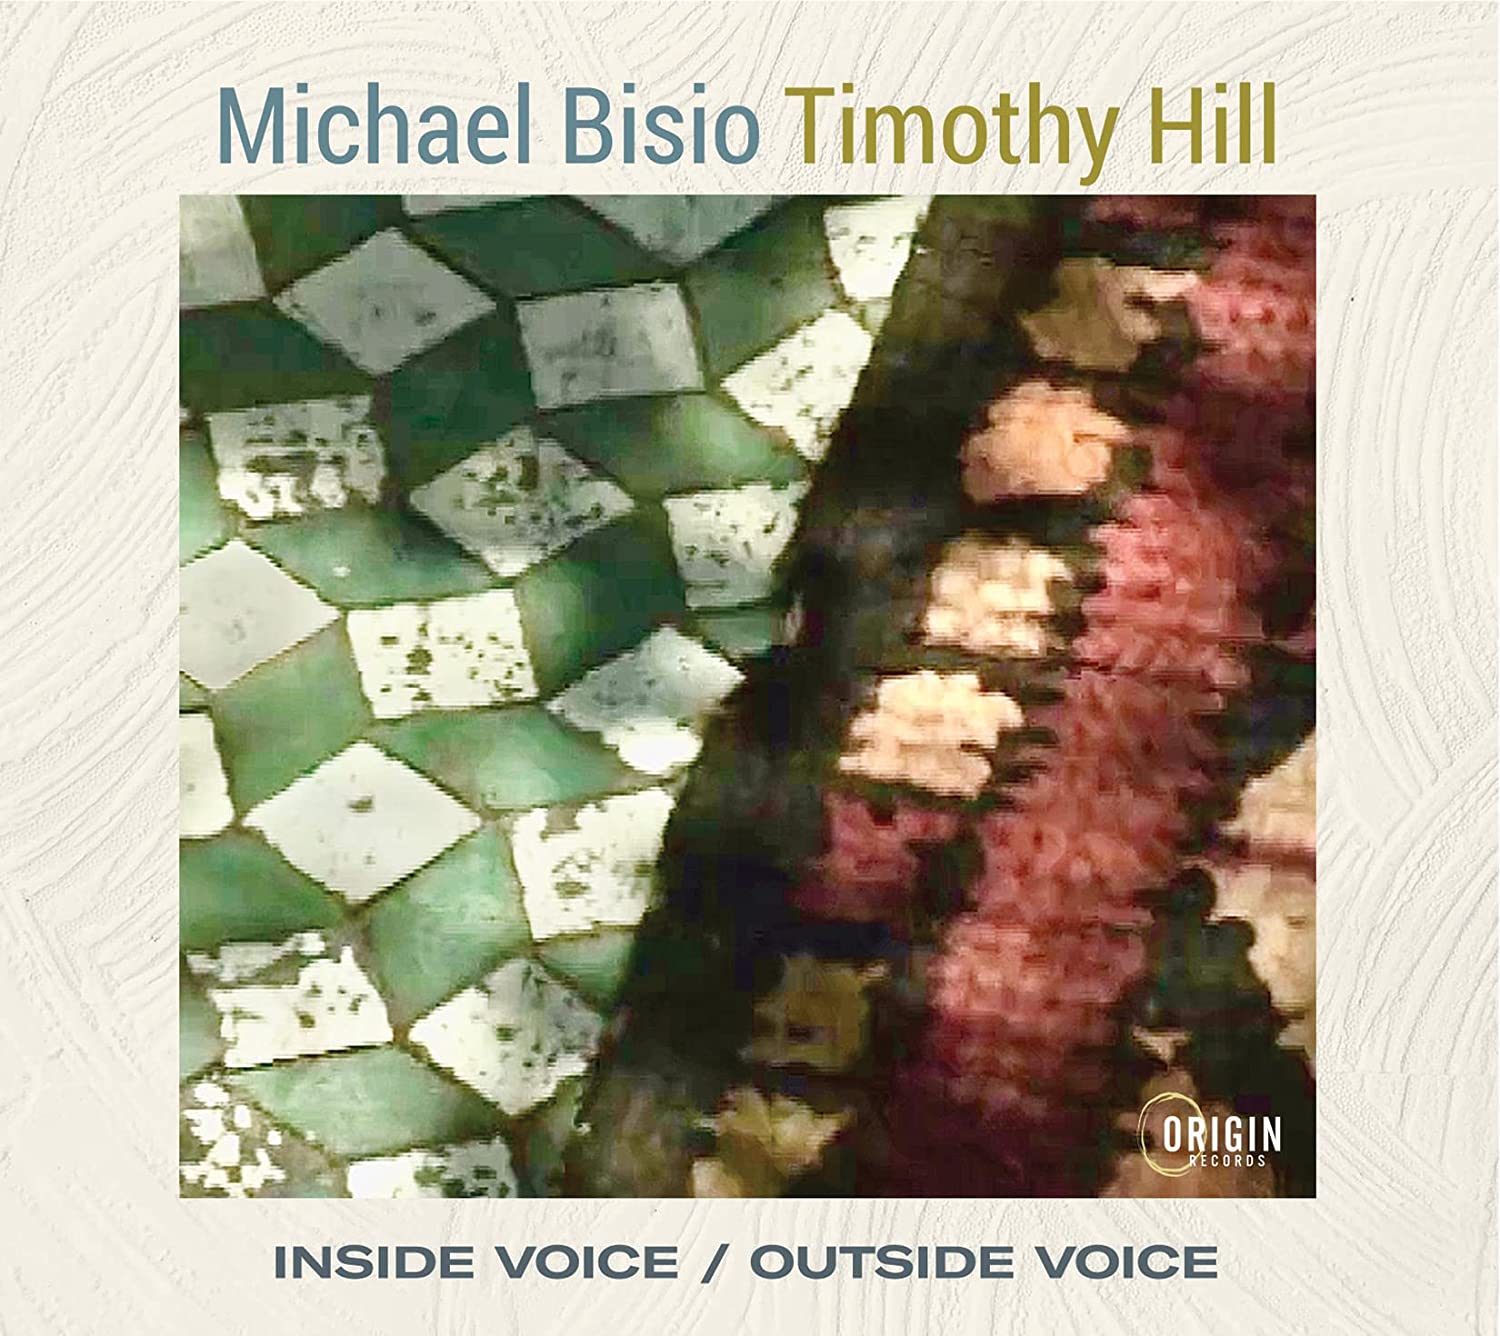 MICHAEL BISIO - Michael Bisio, Timothy Hill : Inside Voice / Outside Voice cover 